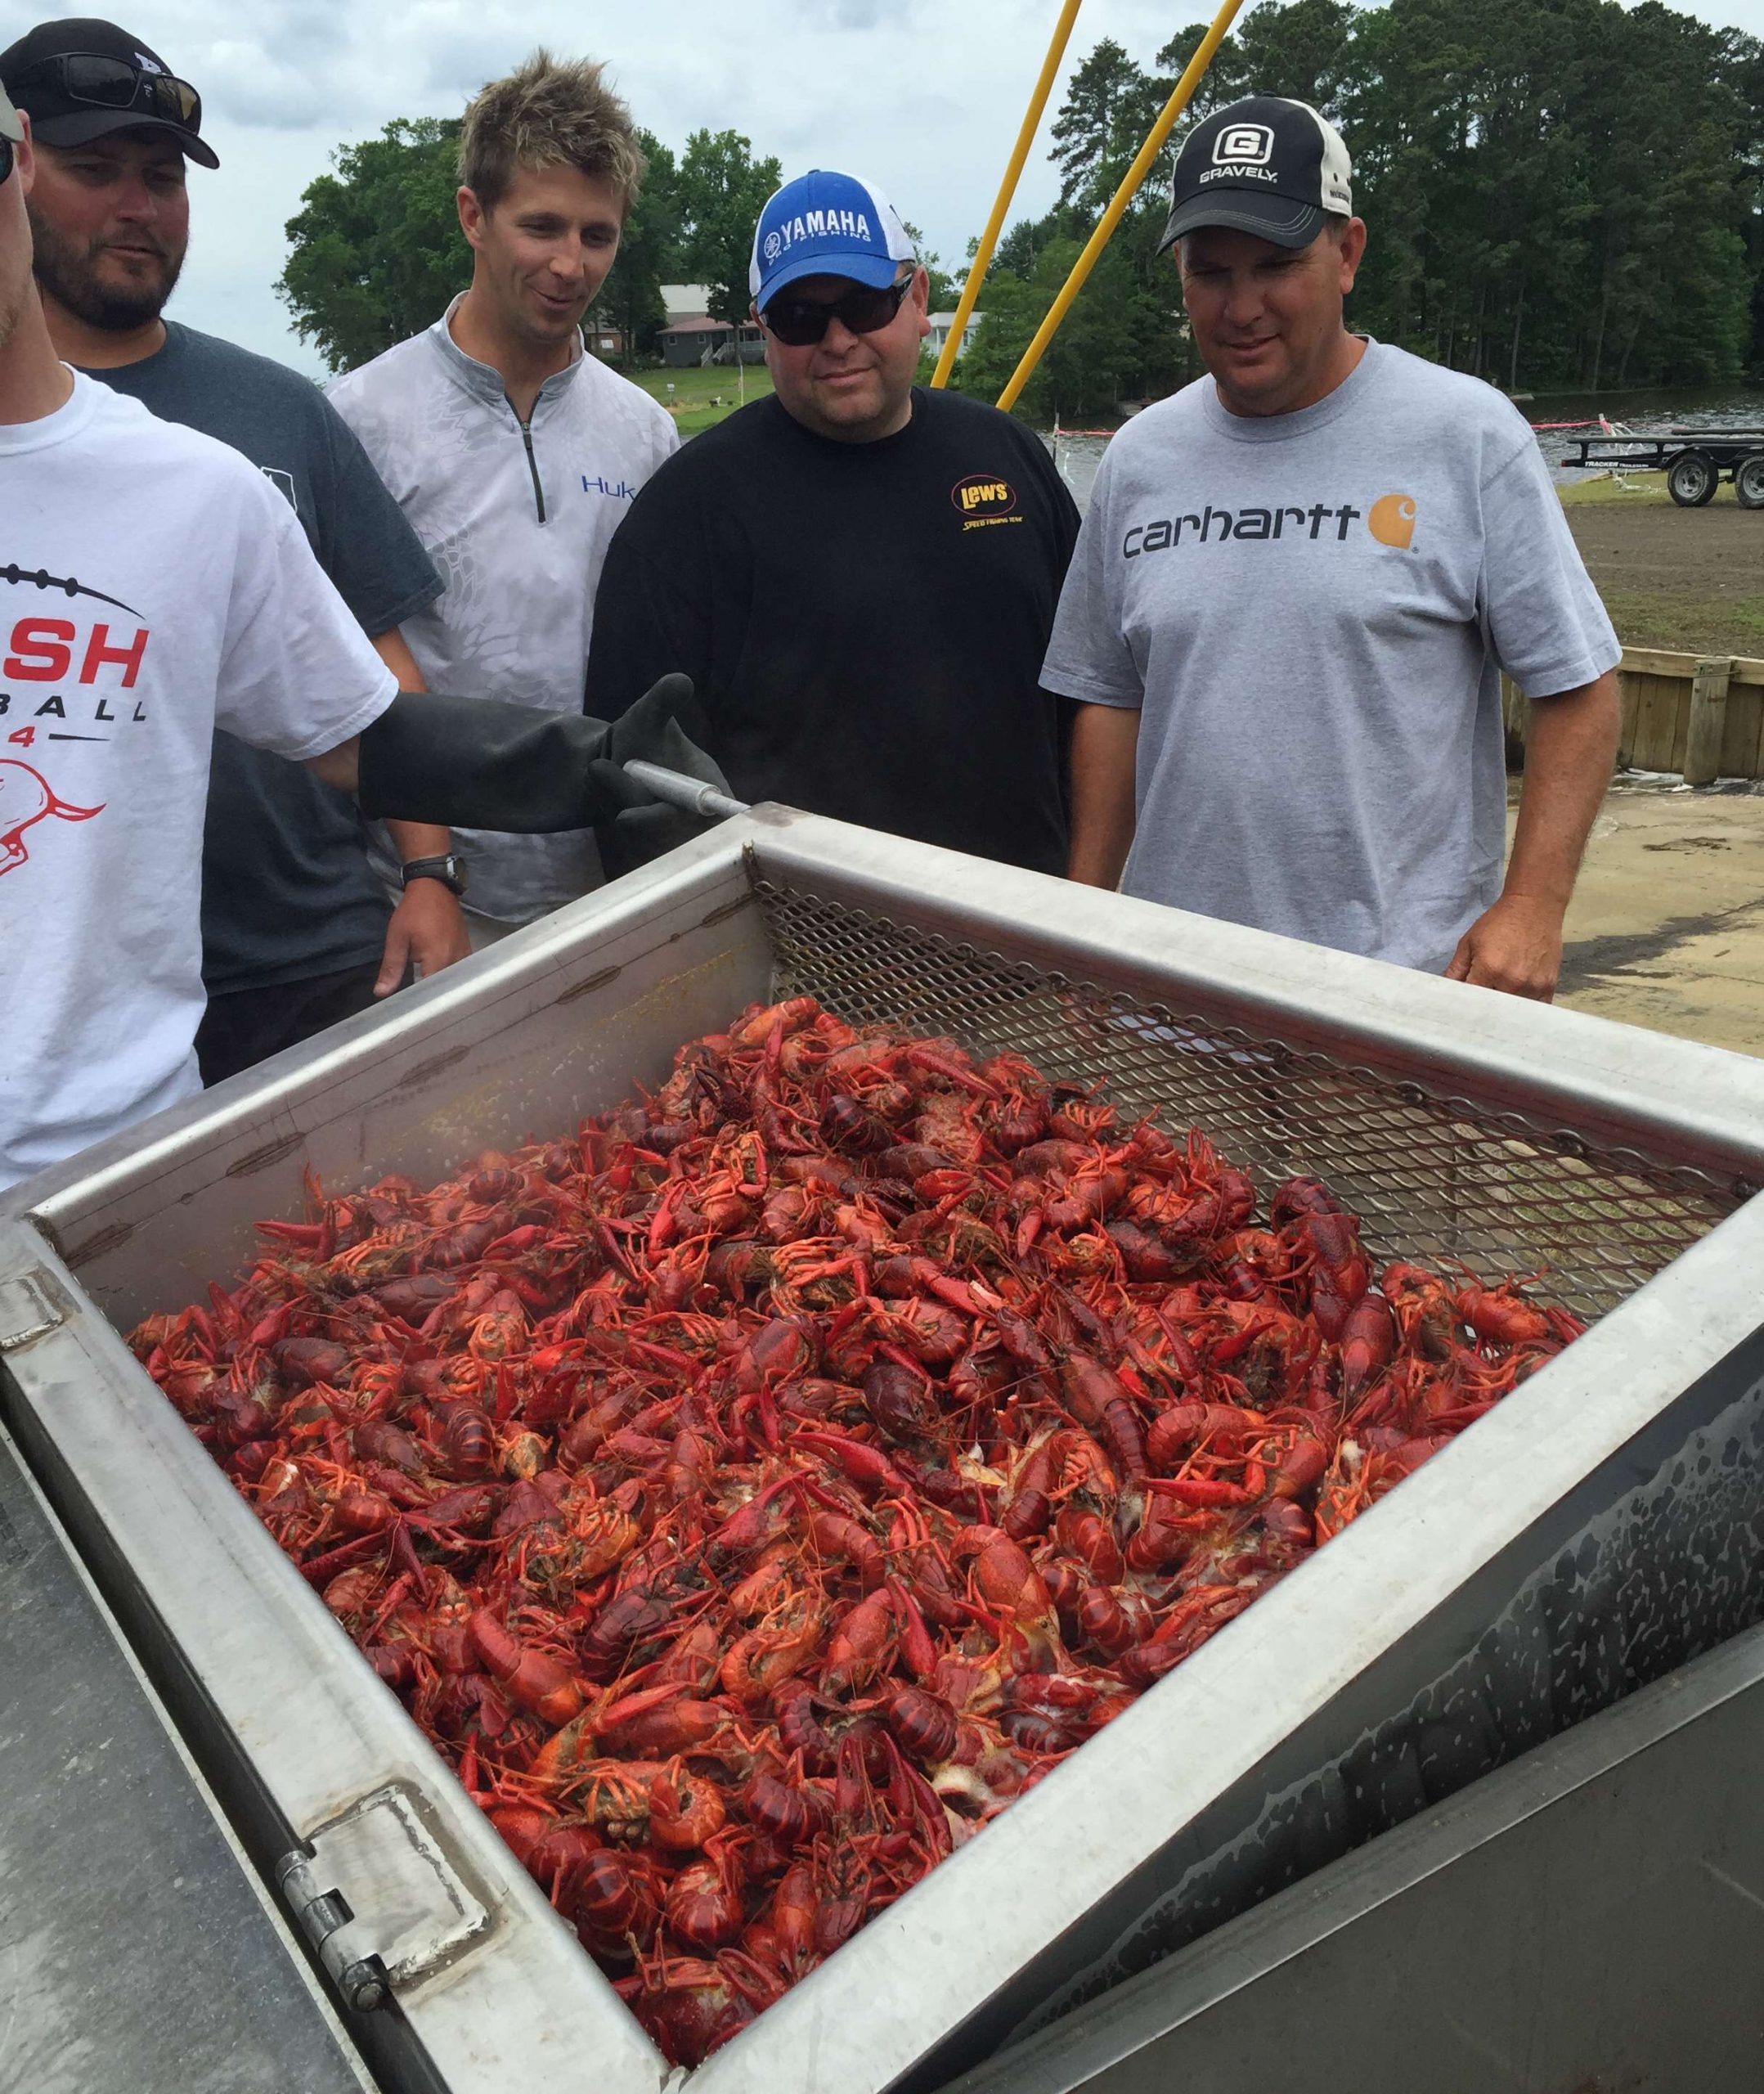 Before starting practice for this weekâs A.R.E. Truck Caps Bassmaster Elite at Toledo Bend, the pros and their families were invited to enjoy a crawfish bonanza with Louisiana angler Dennis Tietje.